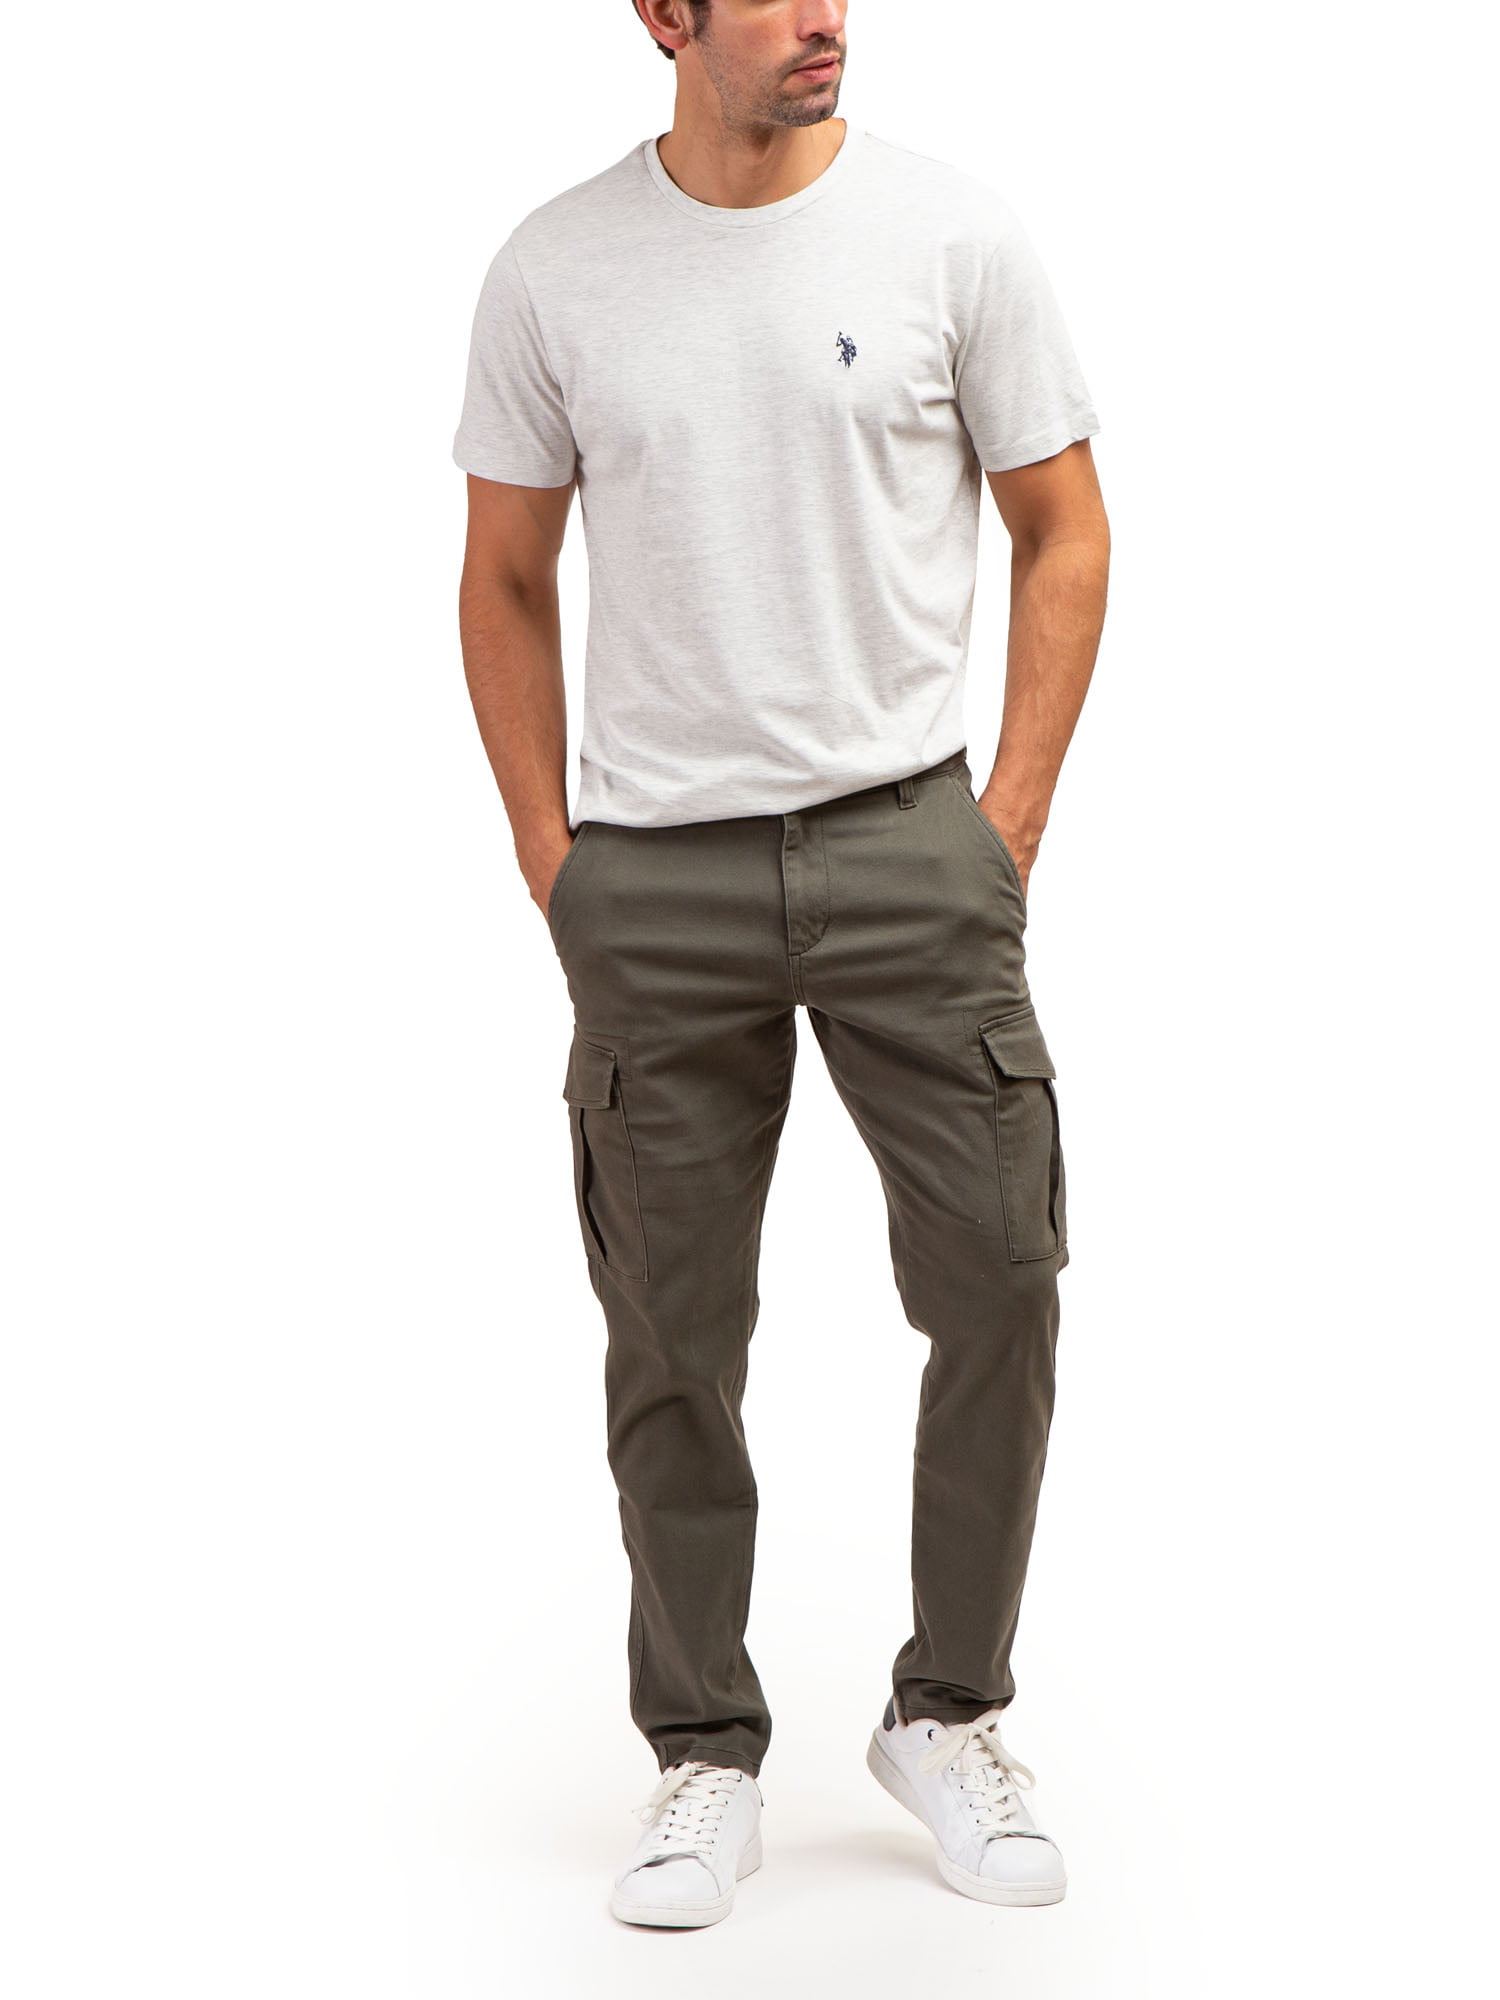 Buy U.S. POLO ASSN. Men's Straight Fit Casual Trousers at Amazon.in